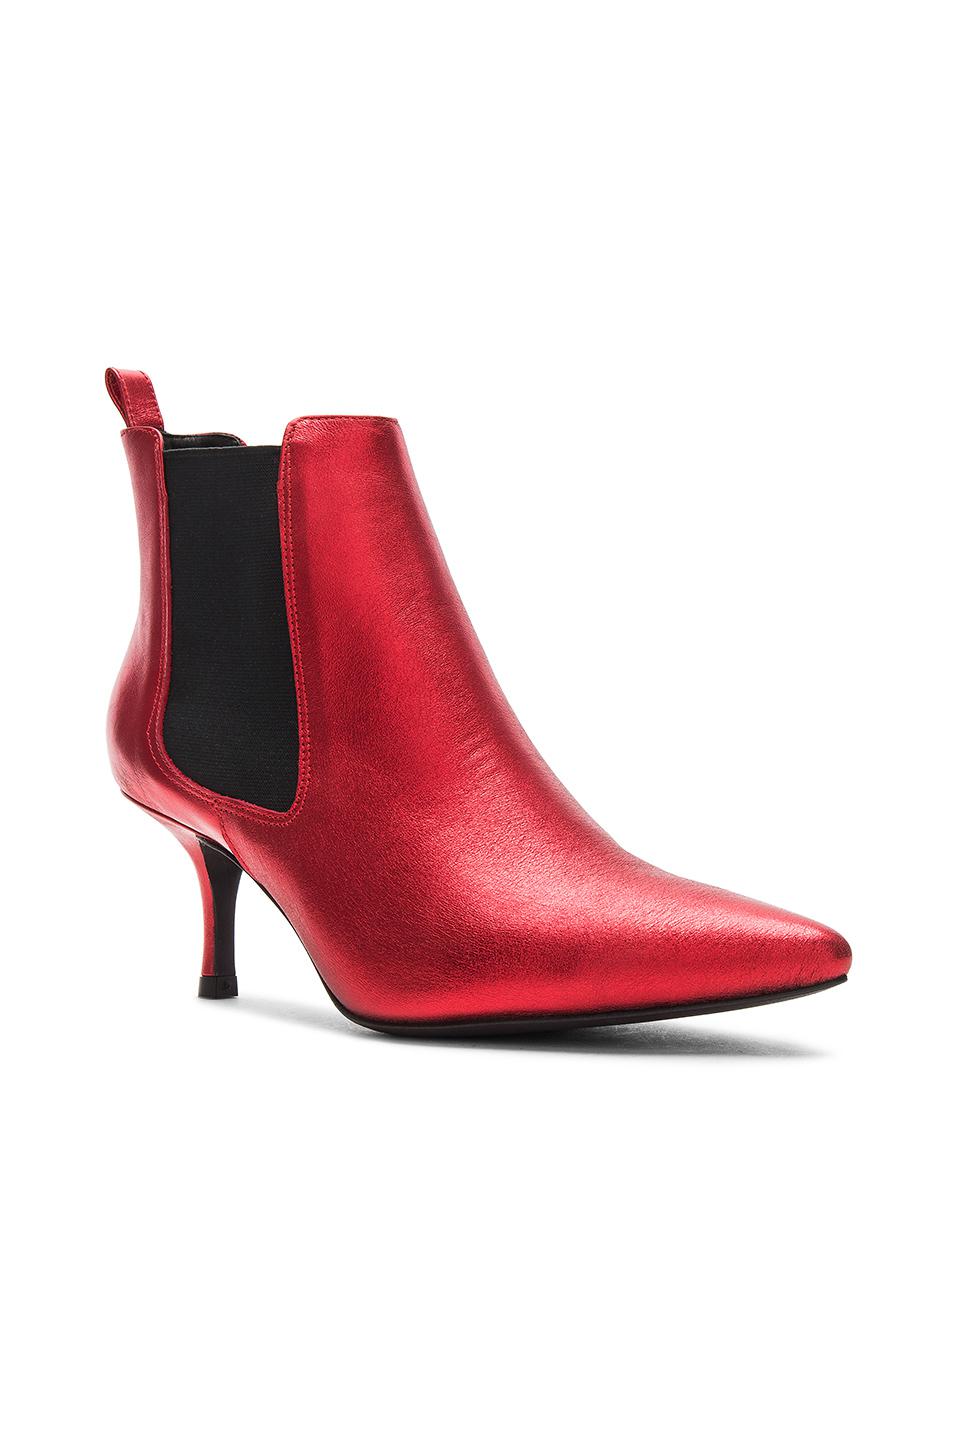 Anine Bing Leather Stevie Ankle Boots in Red - Lyst